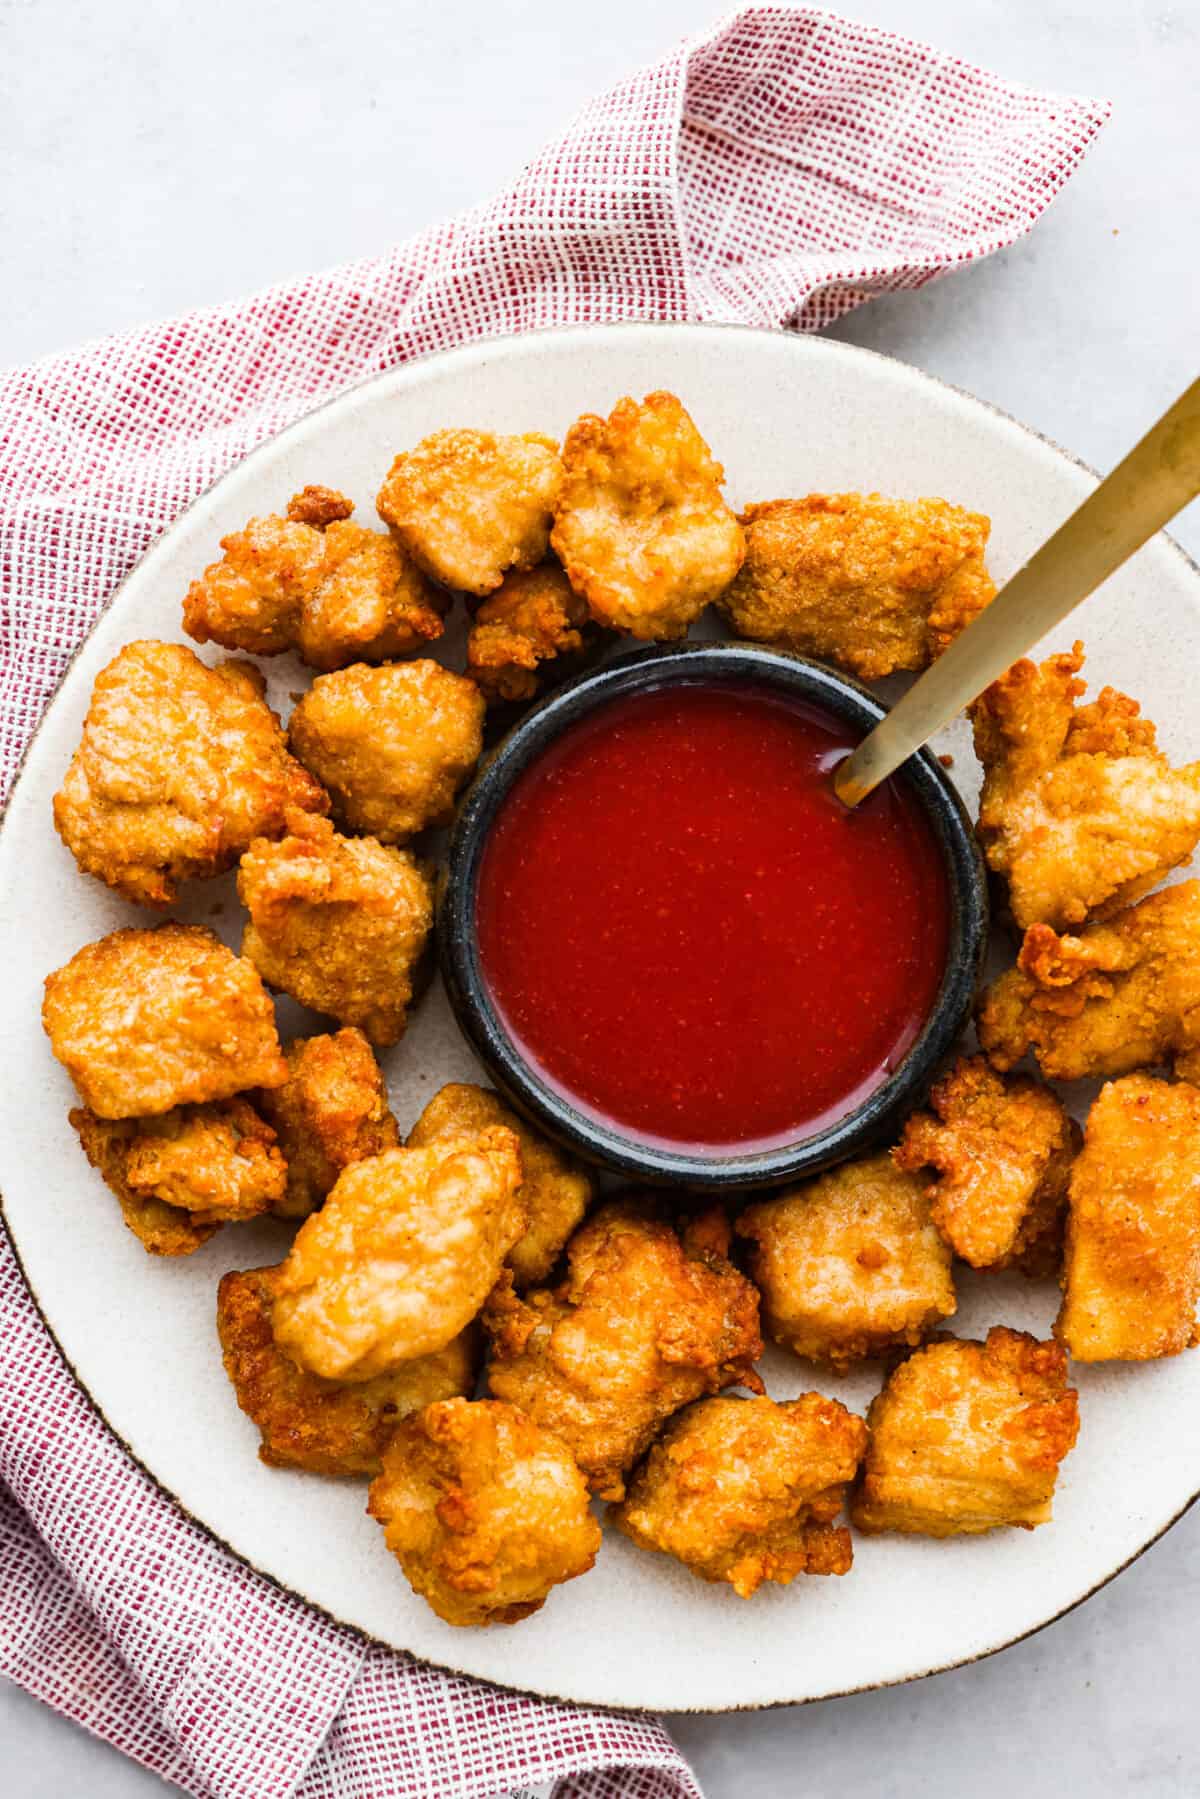 Top-down view of sauce and chicken nuggets on a white plate.